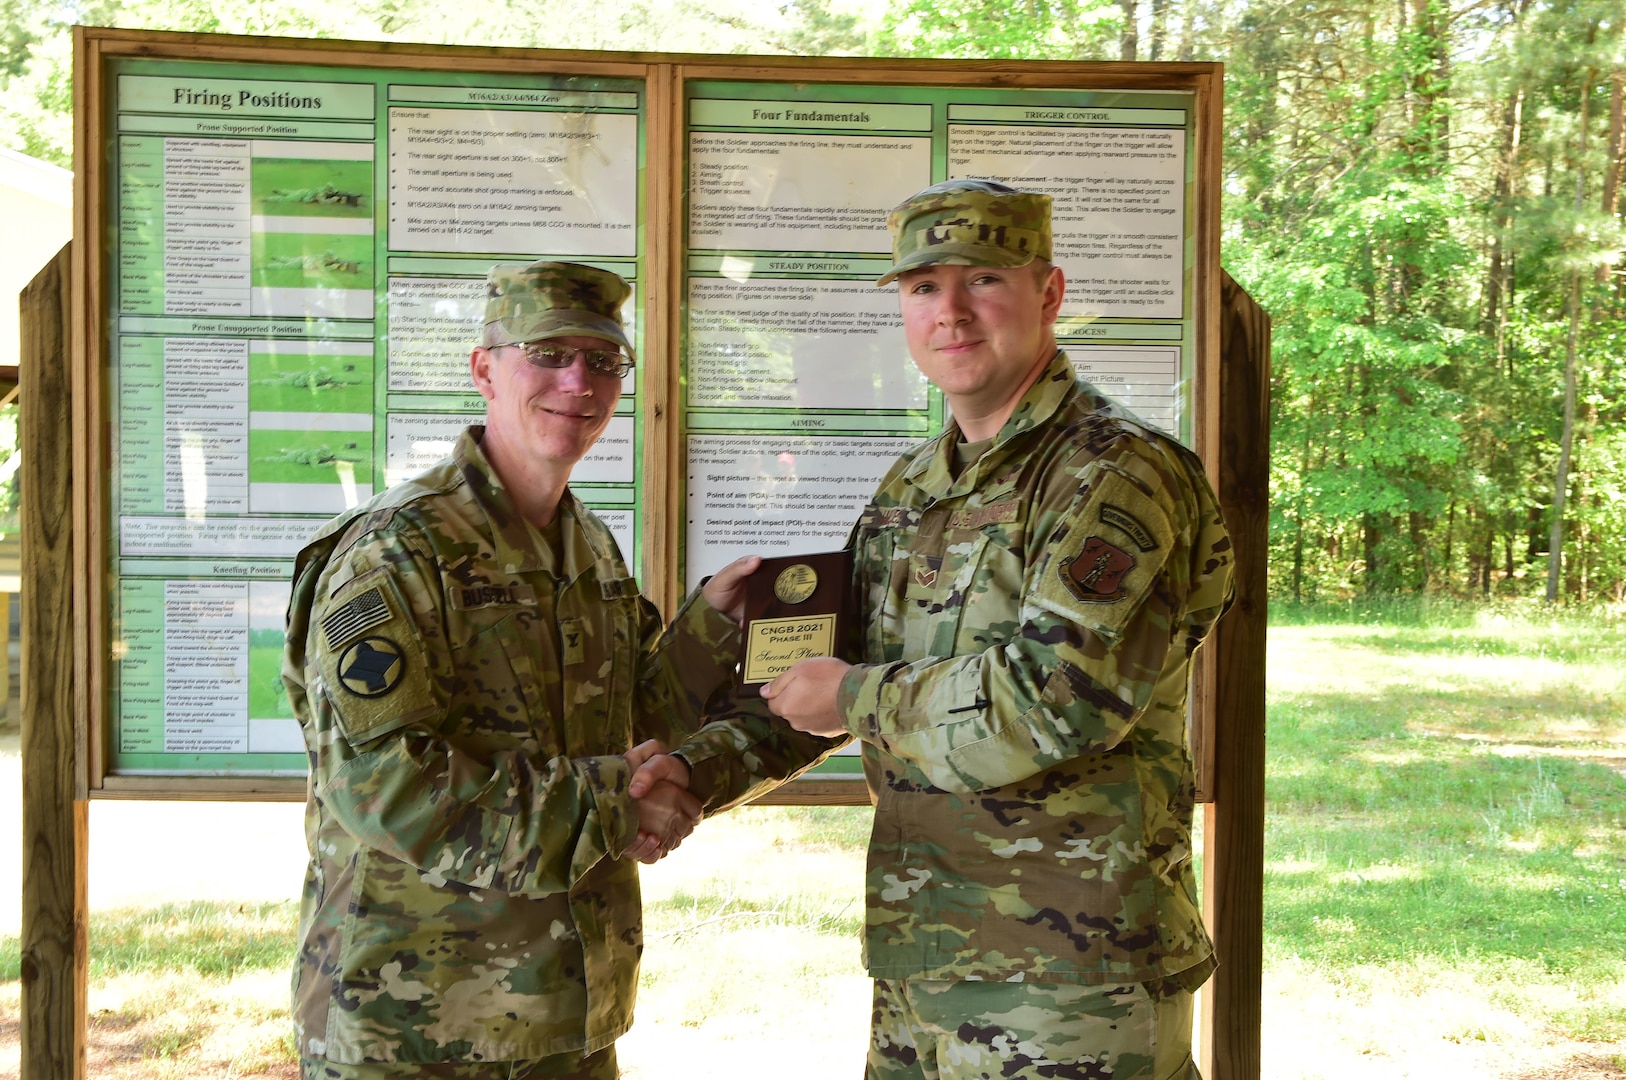 Senior Airman Andrew Jaques, Arkansas National Guard, was presented the overall second place aggregate champion plaque by Col. Andy Bussell, commander of the National Guard Marksmanship Training Center, at Camp Butner, Hampton, North Carolina, May 21, 2021. Jaques scored 2,767-37X during the 2021 Chief, National Guard Bureau Postal Matches.